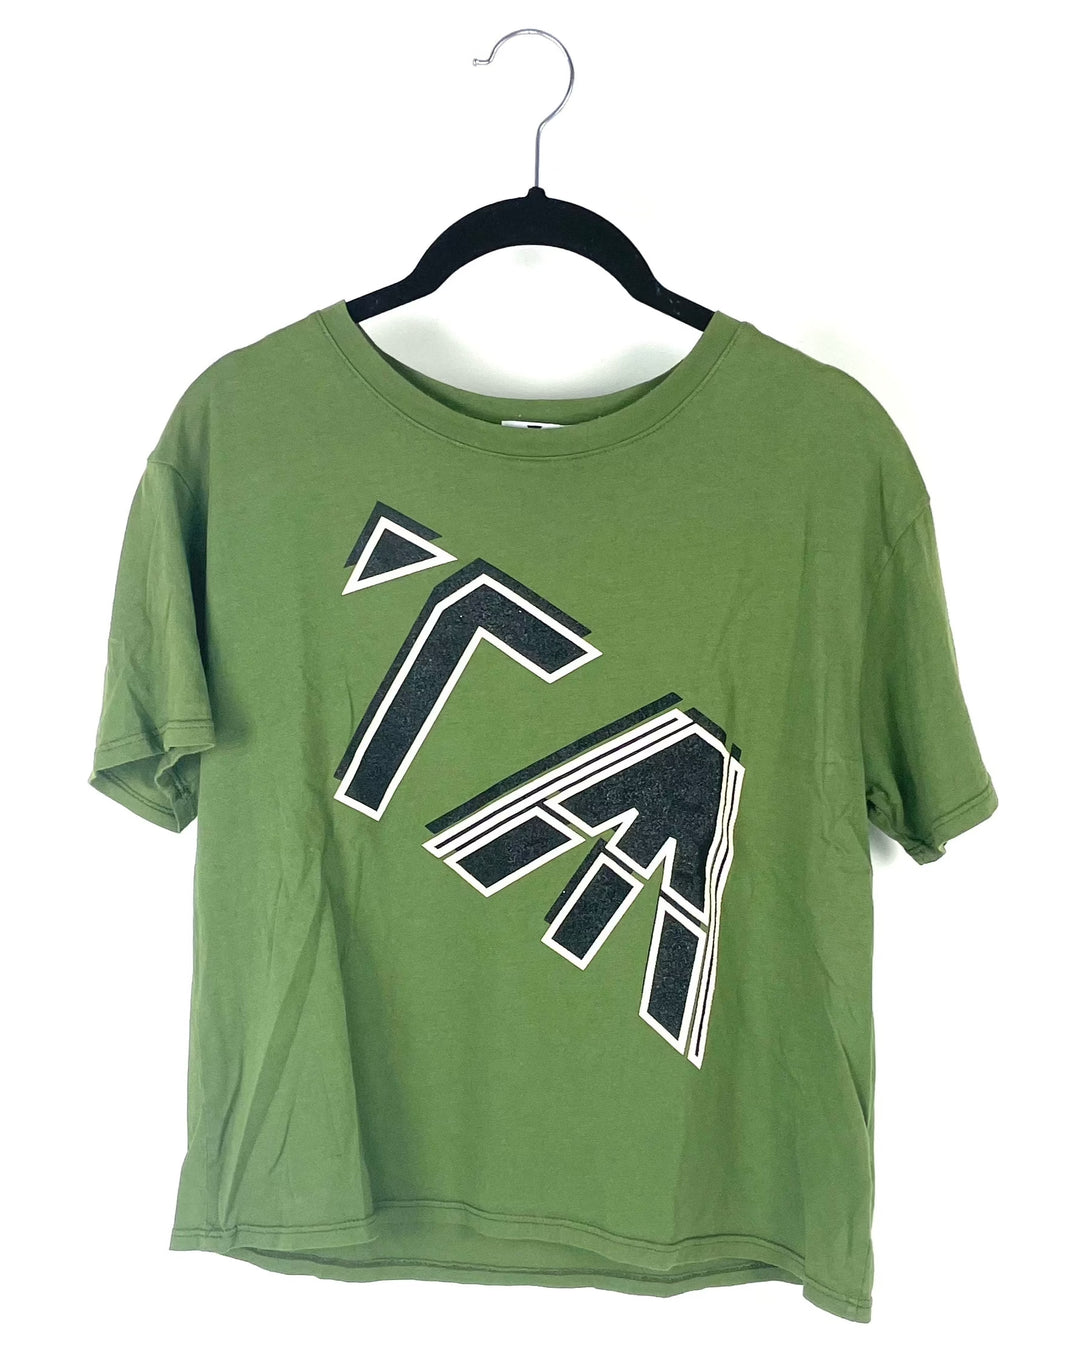 Green Short Sleeve Top - Size 0 and 2